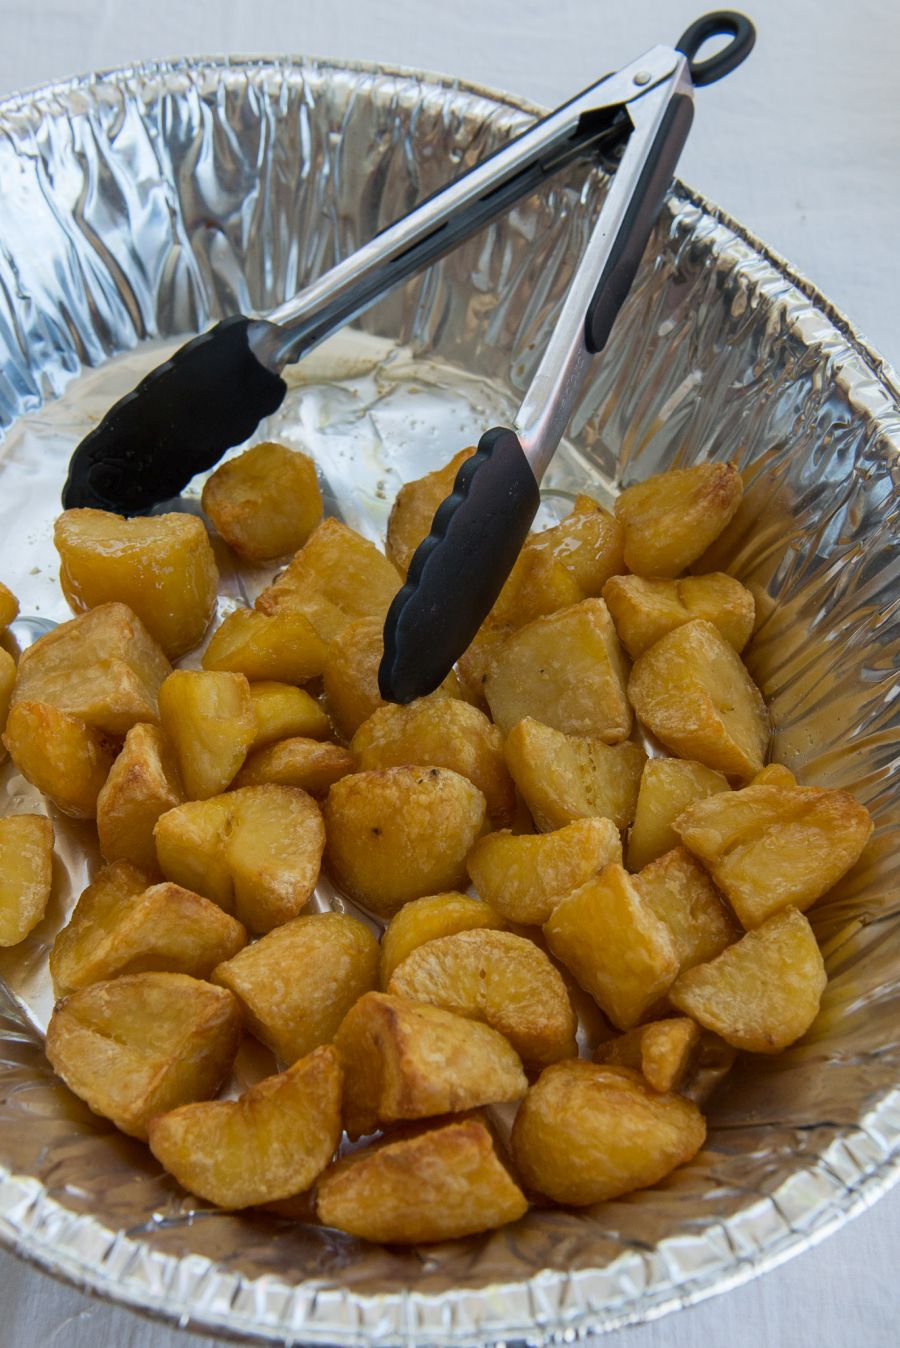 Oven-roasted duck fat potatoes